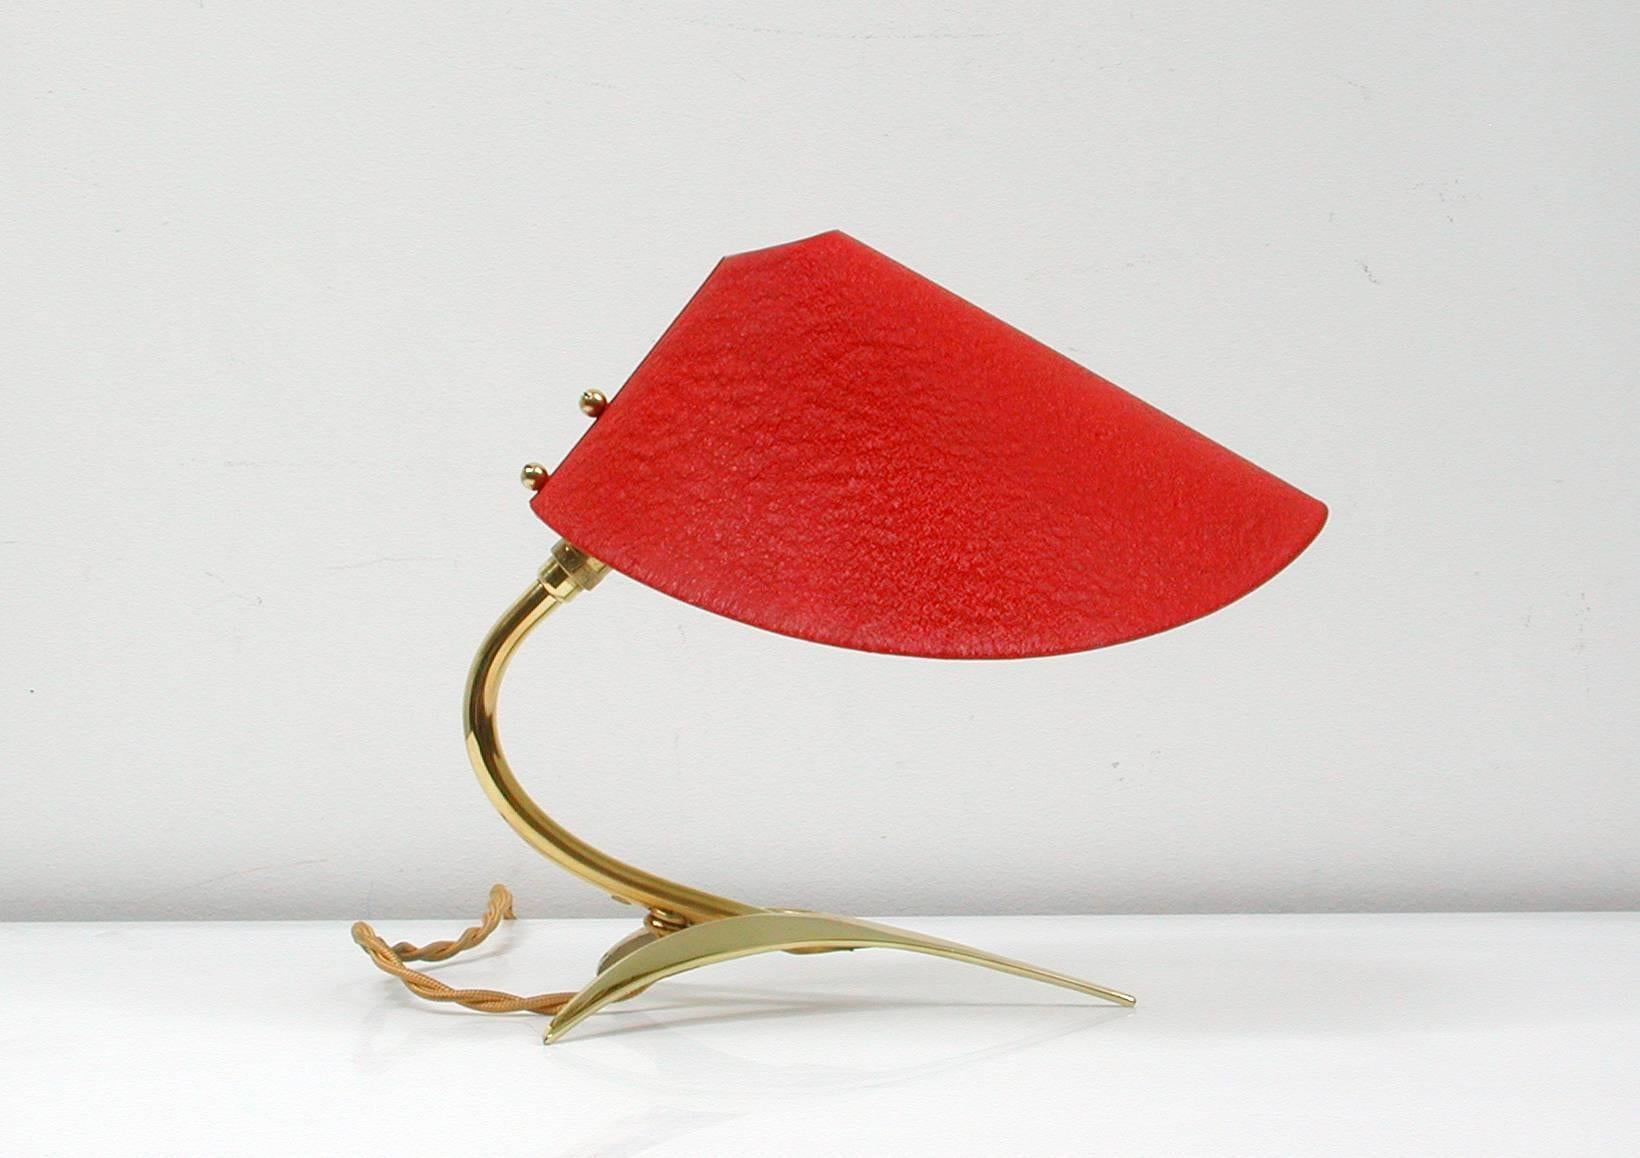 Mid-Century brass and red lacquered table lamp, made in Austria in the 1950s in the manner of JT Kalmar.
The lamp has got a tripod brass base and an adjustable red lacquered lamp shade. It has been rewired with new fabric wiring and will work on